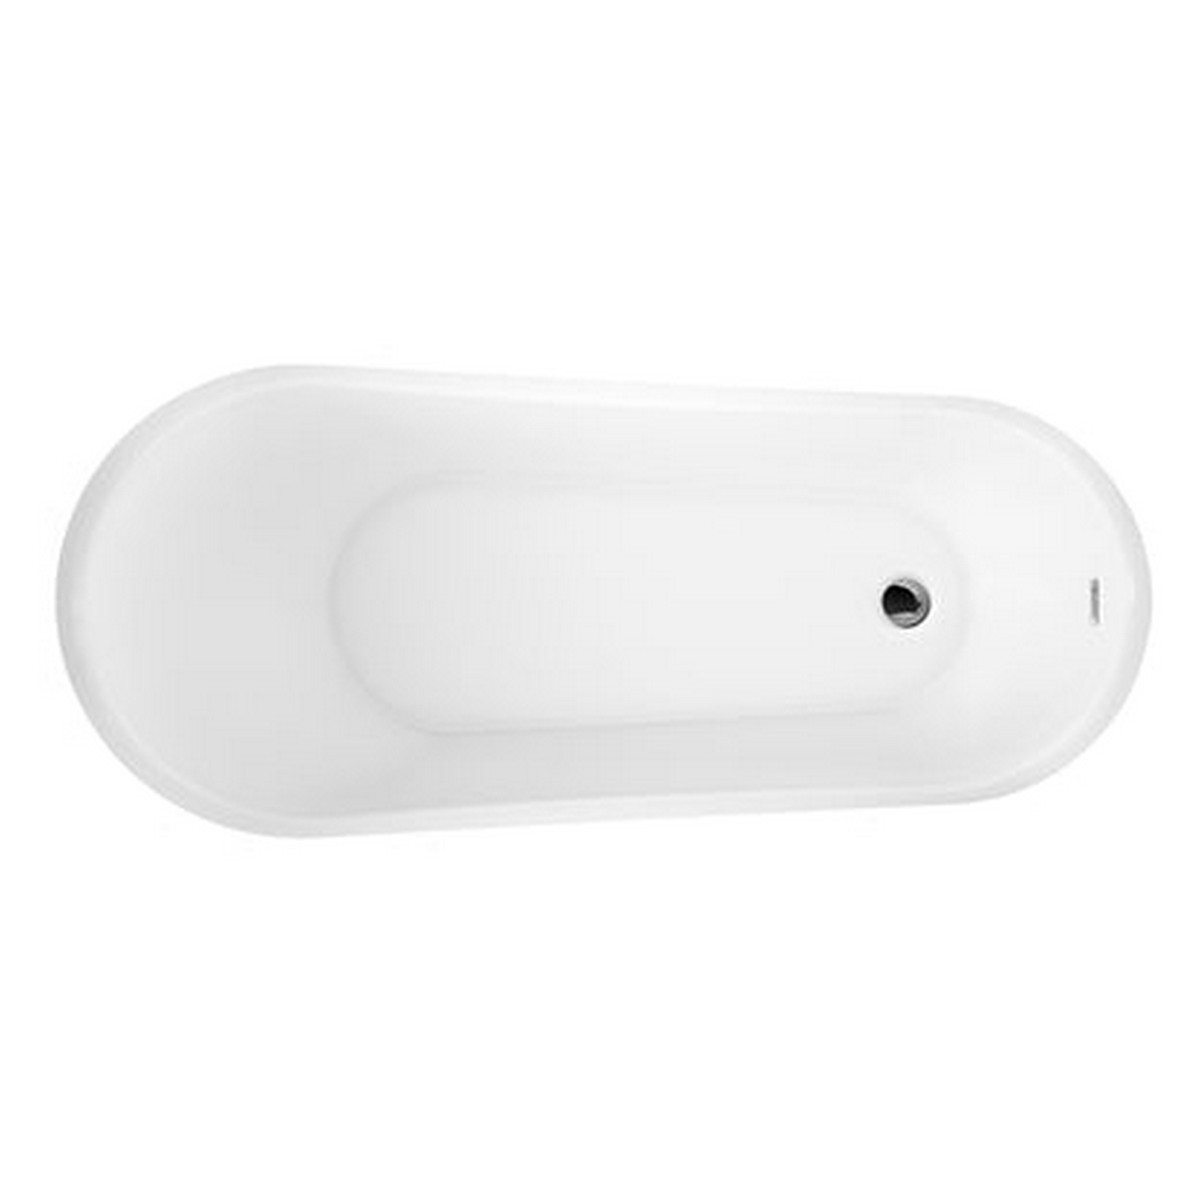 BARCLAY ATSN66EIG LOVINA 66 INCH ACRYLIC FREESTANDING OVAL SOAKING SLIPPER BATHTUB IN WHITE WITH INTEGRATED DRAIN AND OVERFLOW